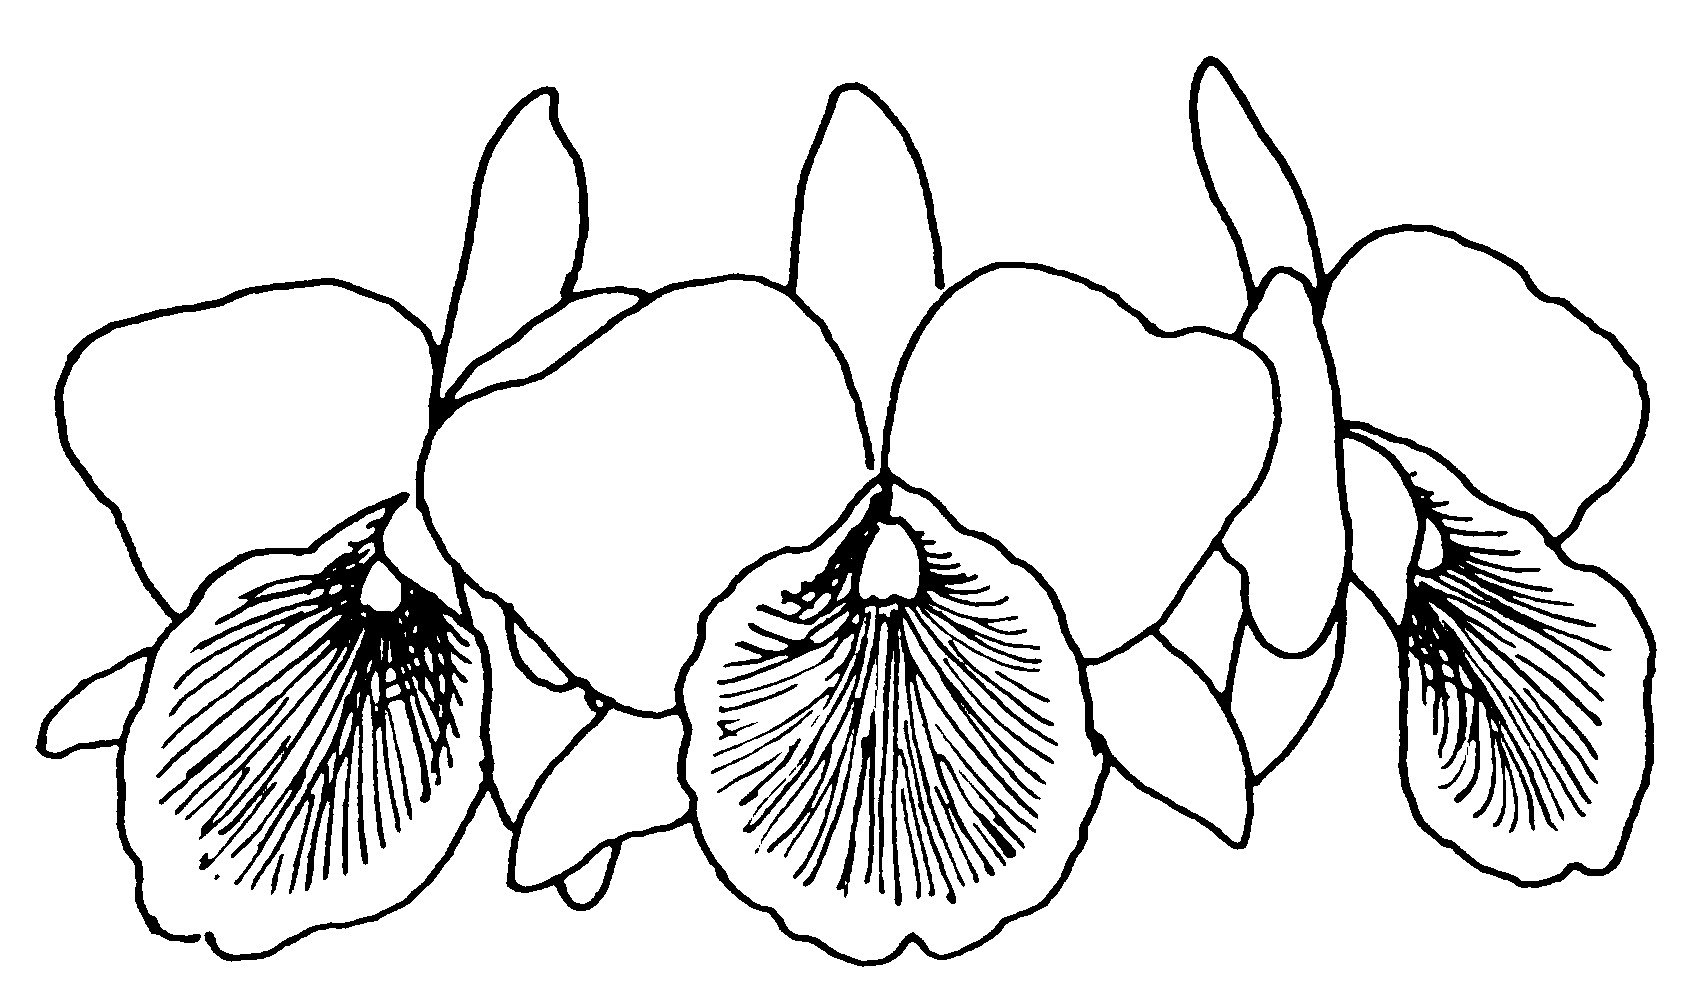 Three Orchid Flowers